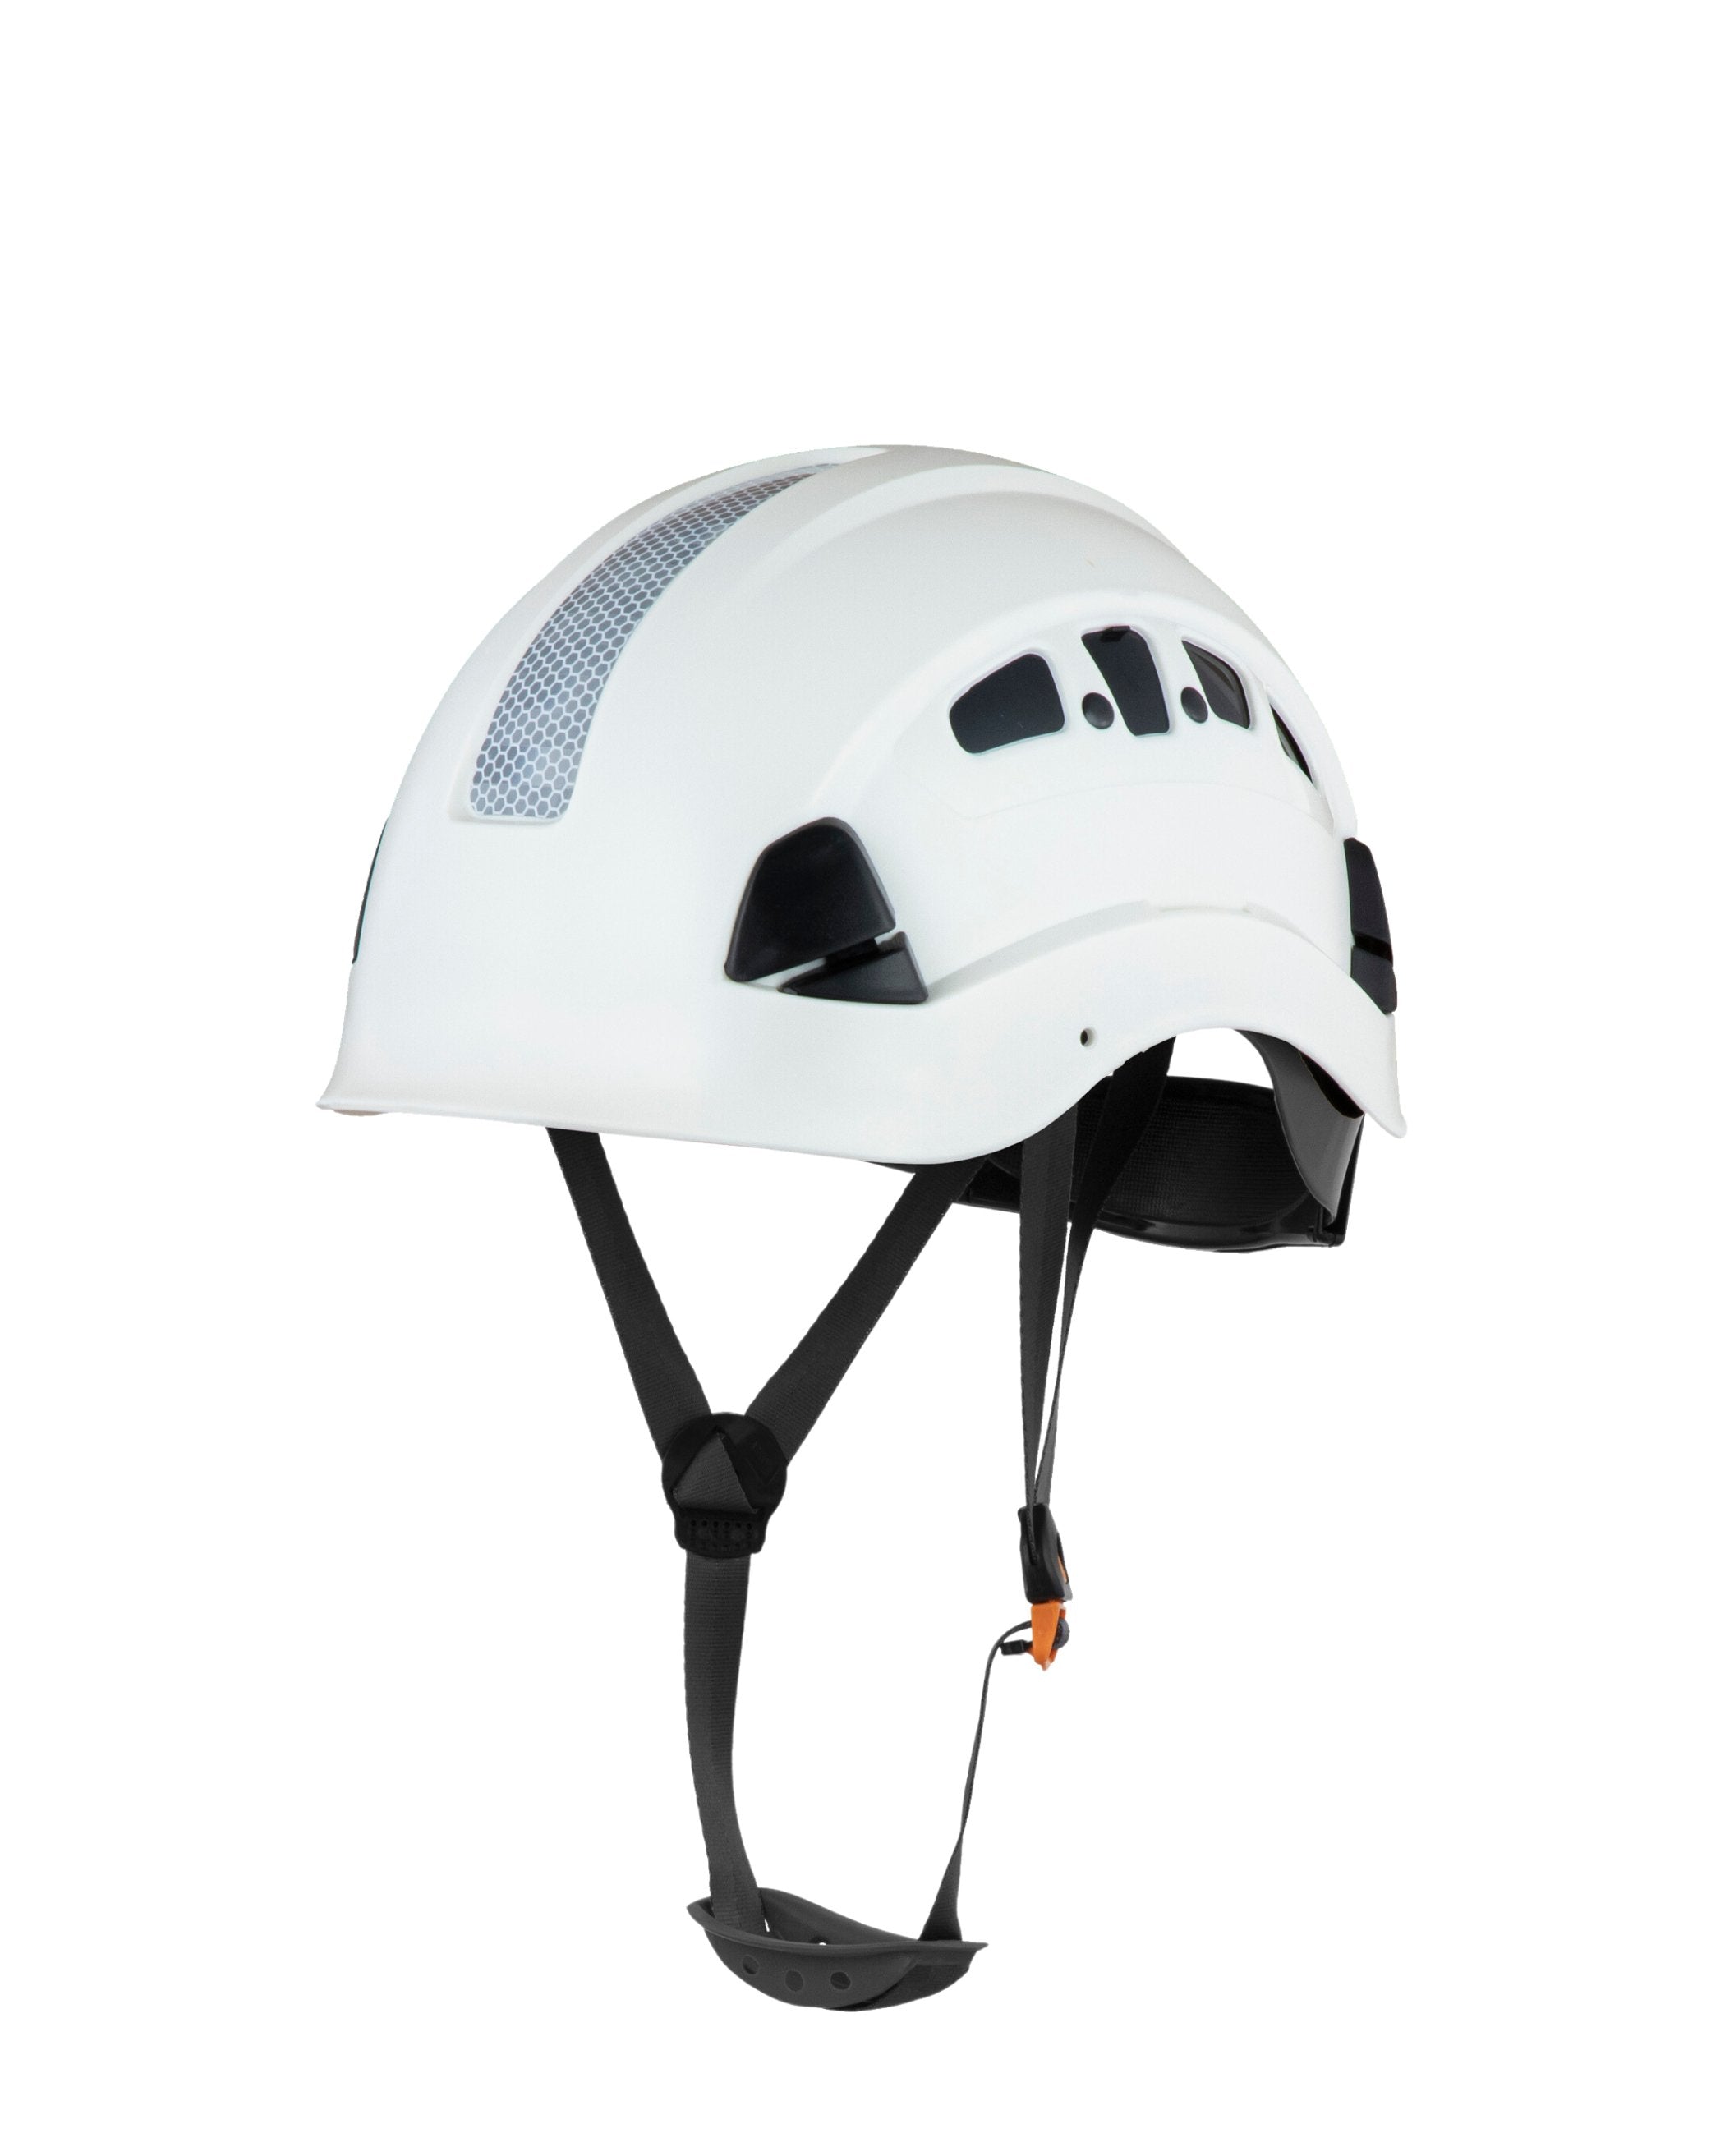 H1-CH Safety Helmet Type 1, Class C, ANSI Z89 & EN 397 Rated - Defender Safety